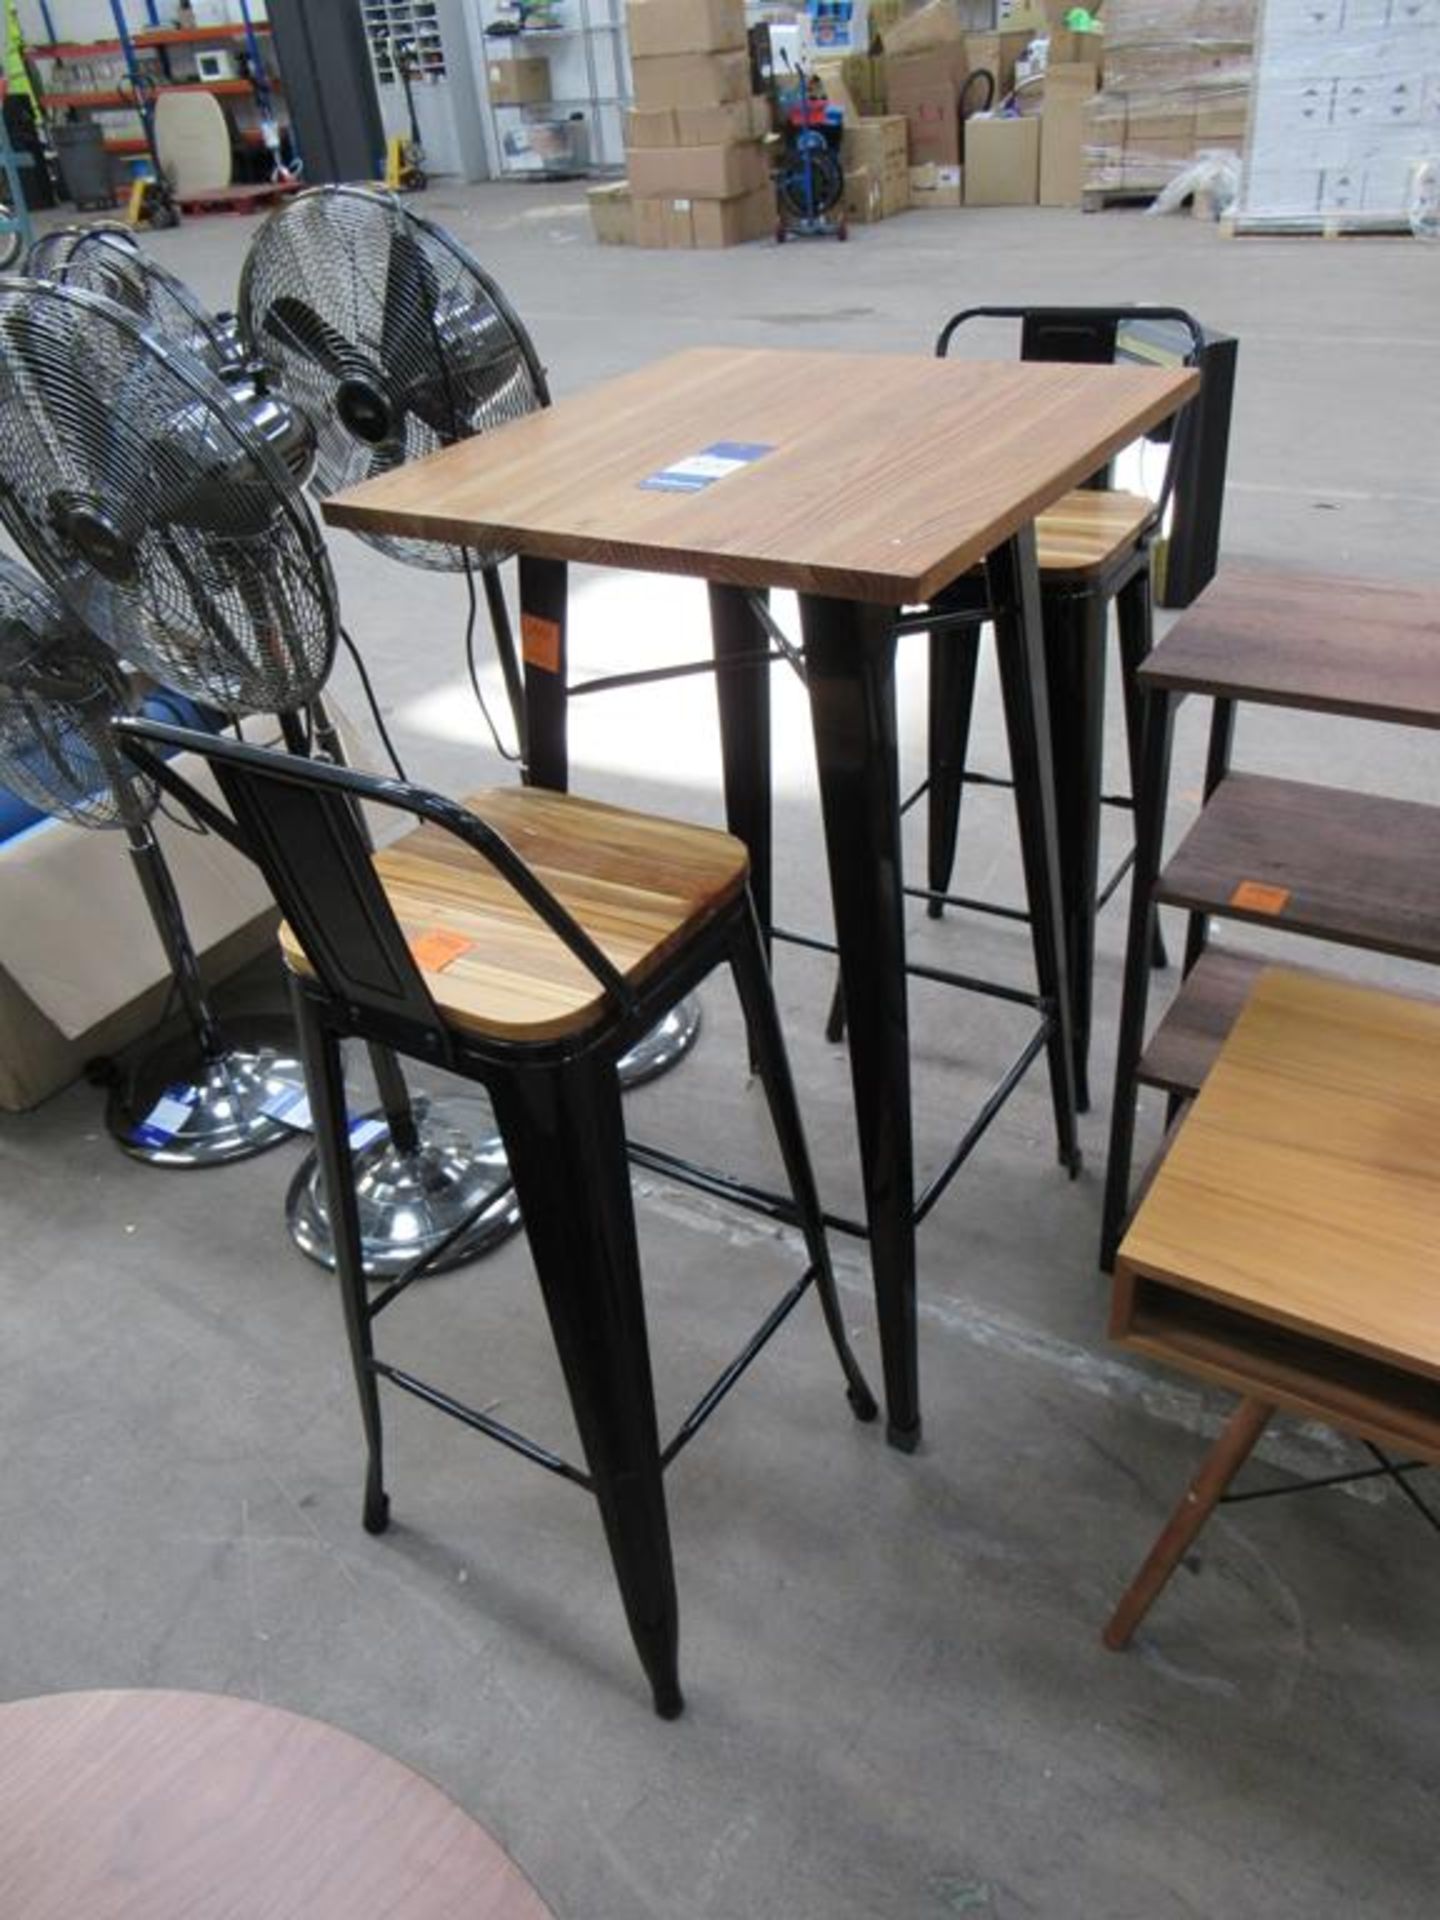 Wooden Topped, Black Painted, Metal Based Table and 2x Matching Highchairs.